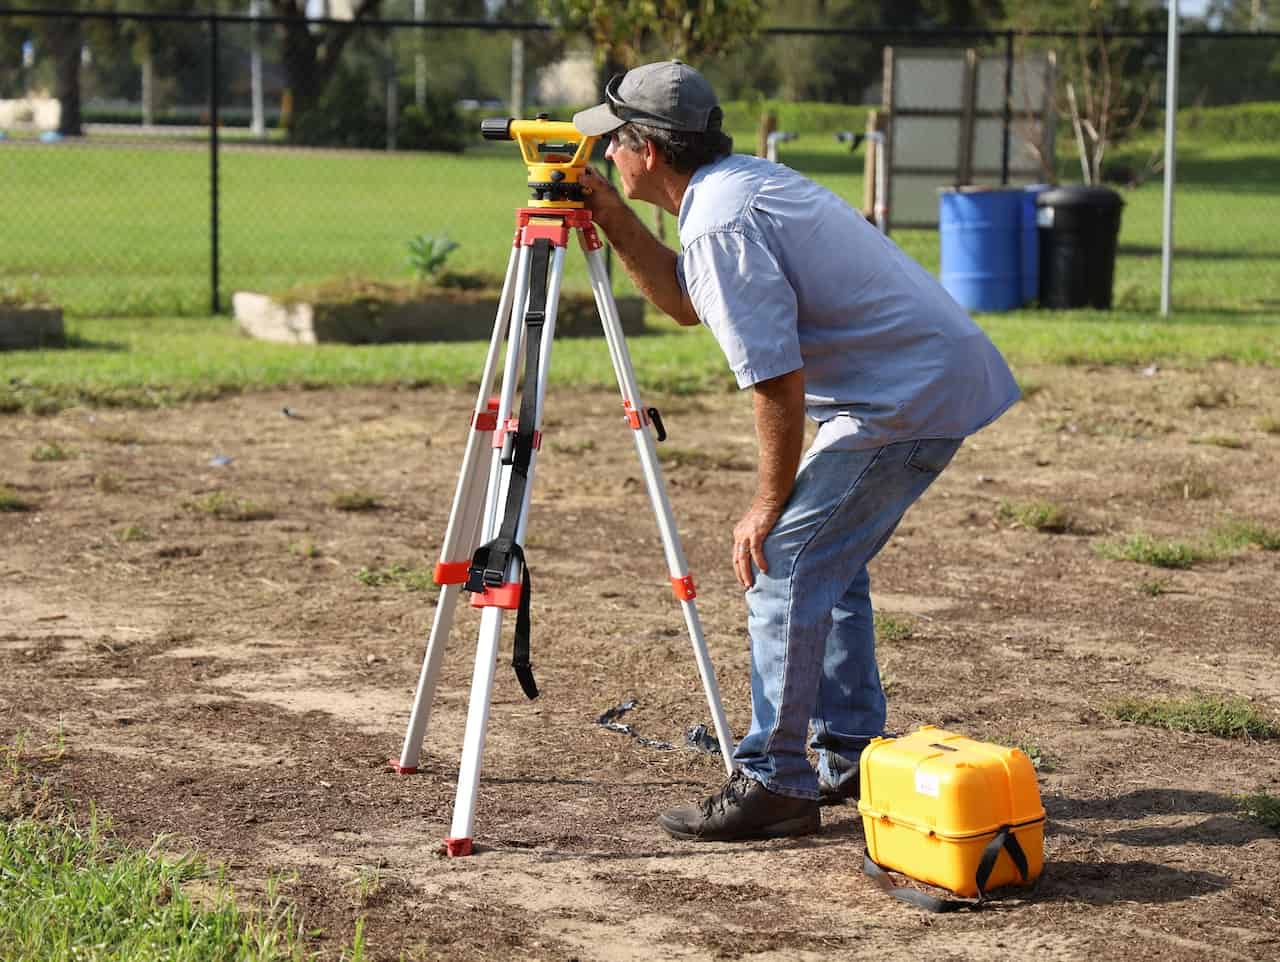 A Man Doing Land Surveying As Part of The Land Asset Management